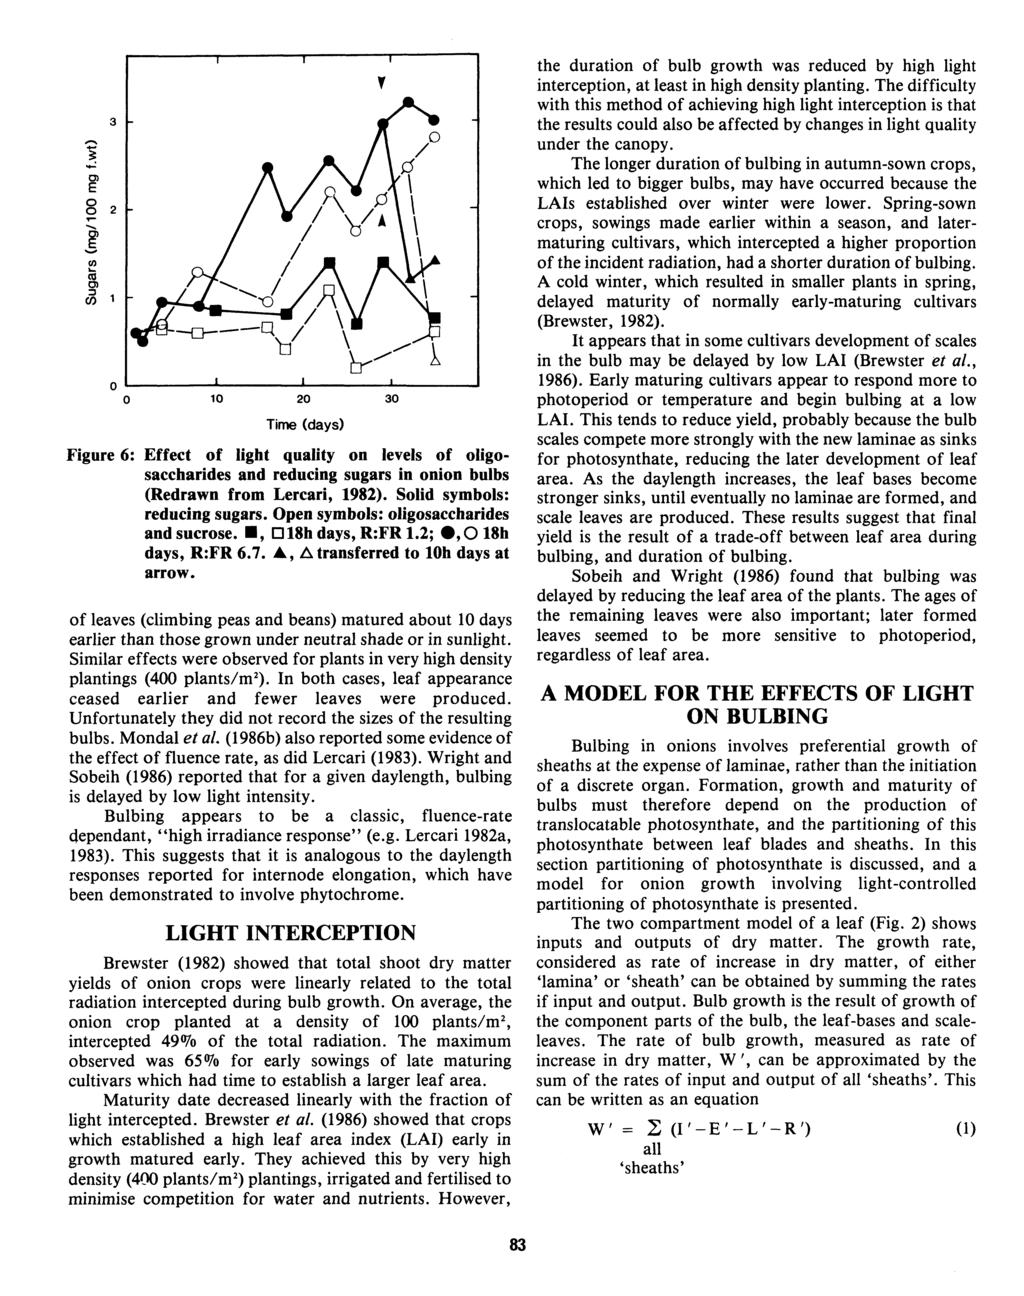 0 ~------~--------~------~------~ 0 10 20 30 Time (days) Figure 6: Effect of light quality on levels of oligosaccharides and reducing sugars in onion bulbs (Redrawn from Lercari, 1982).